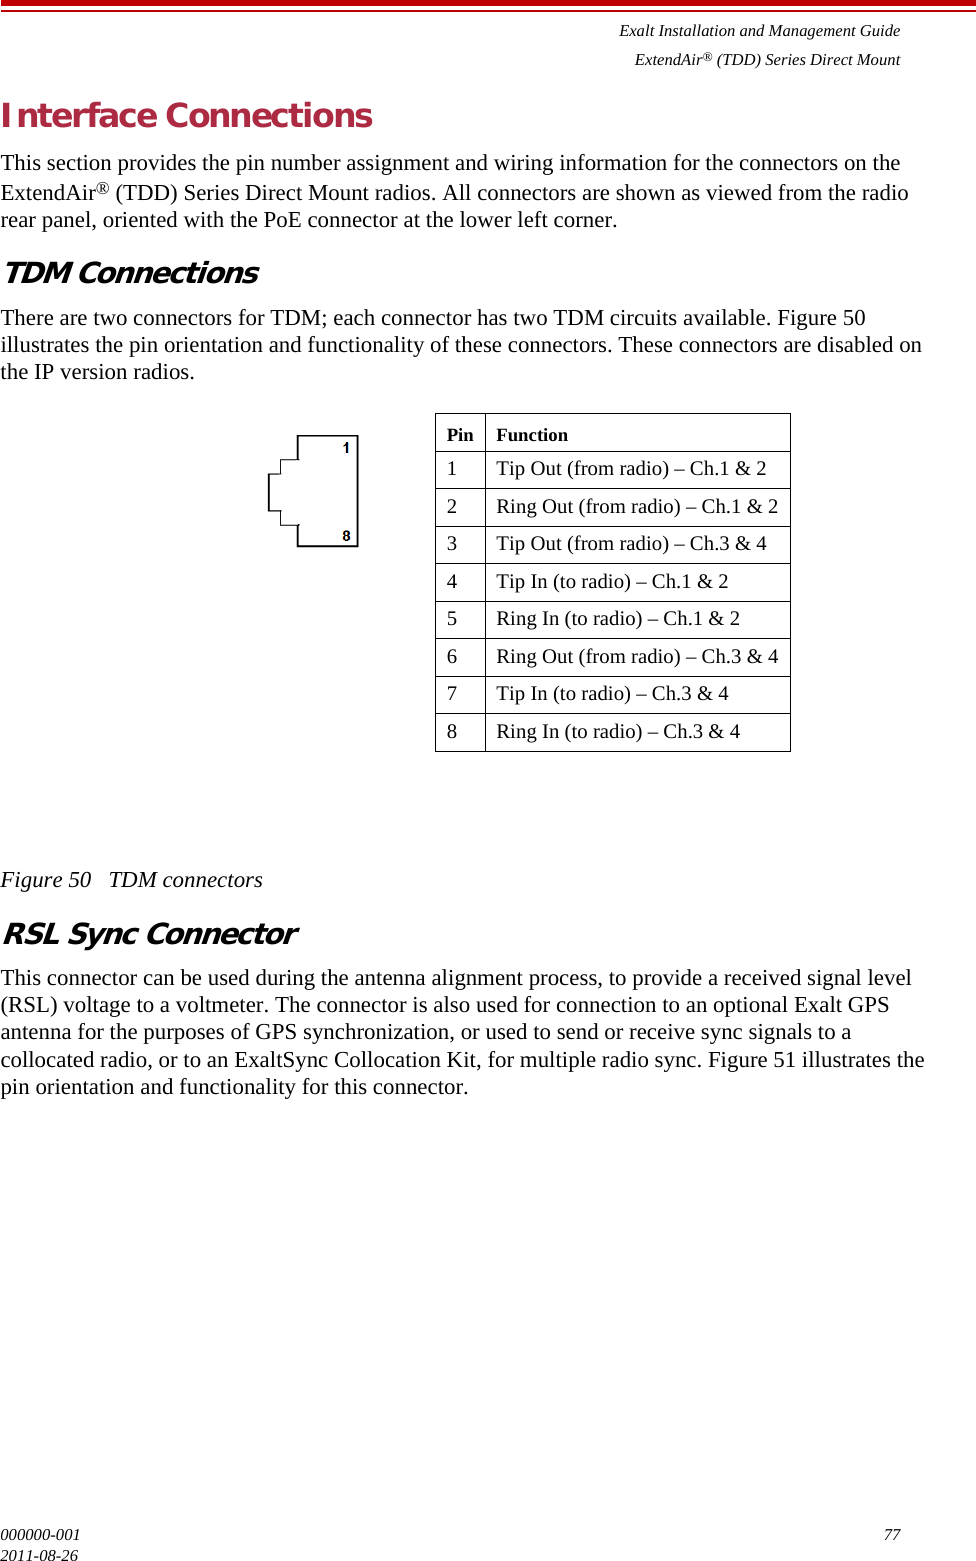 Exalt Installation and Management GuideExtendAir® (TDD) Series Direct Mount000000-001 772011-08-26Interface ConnectionsThis section provides the pin number assignment and wiring information for the connectors on the ExtendAir® (TDD) Series Direct Mount radios. All connectors are shown as viewed from the radio rear panel, oriented with the PoE connector at the lower left corner.TDM ConnectionsThere are two connectors for TDM; each connector has two TDM circuits available. Figure 50 illustrates the pin orientation and functionality of these connectors. These connectors are disabled on the IP version radios.Figure 50   TDM connectorsRSL Sync ConnectorThis connector can be used during the antenna alignment process, to provide a received signal level (RSL) voltage to a voltmeter. The connector is also used for connection to an optional Exalt GPS antenna for the purposes of GPS synchronization, or used to send or receive sync signals to a collocated radio, or to an ExaltSync Collocation Kit, for multiple radio sync. Figure 51 illustrates the pin orientation and functionality for this connector.Pin Function1 Tip Out (from radio) – Ch.1 &amp; 22 Ring Out (from radio) – Ch.1 &amp; 23 Tip Out (from radio) – Ch.3 &amp; 44 Tip In (to radio) – Ch.1 &amp; 25 Ring In (to radio) – Ch.1 &amp; 26 Ring Out (from radio) – Ch.3 &amp; 47 Tip In (to radio) – Ch.3 &amp; 48 Ring In (to radio) – Ch.3 &amp; 4